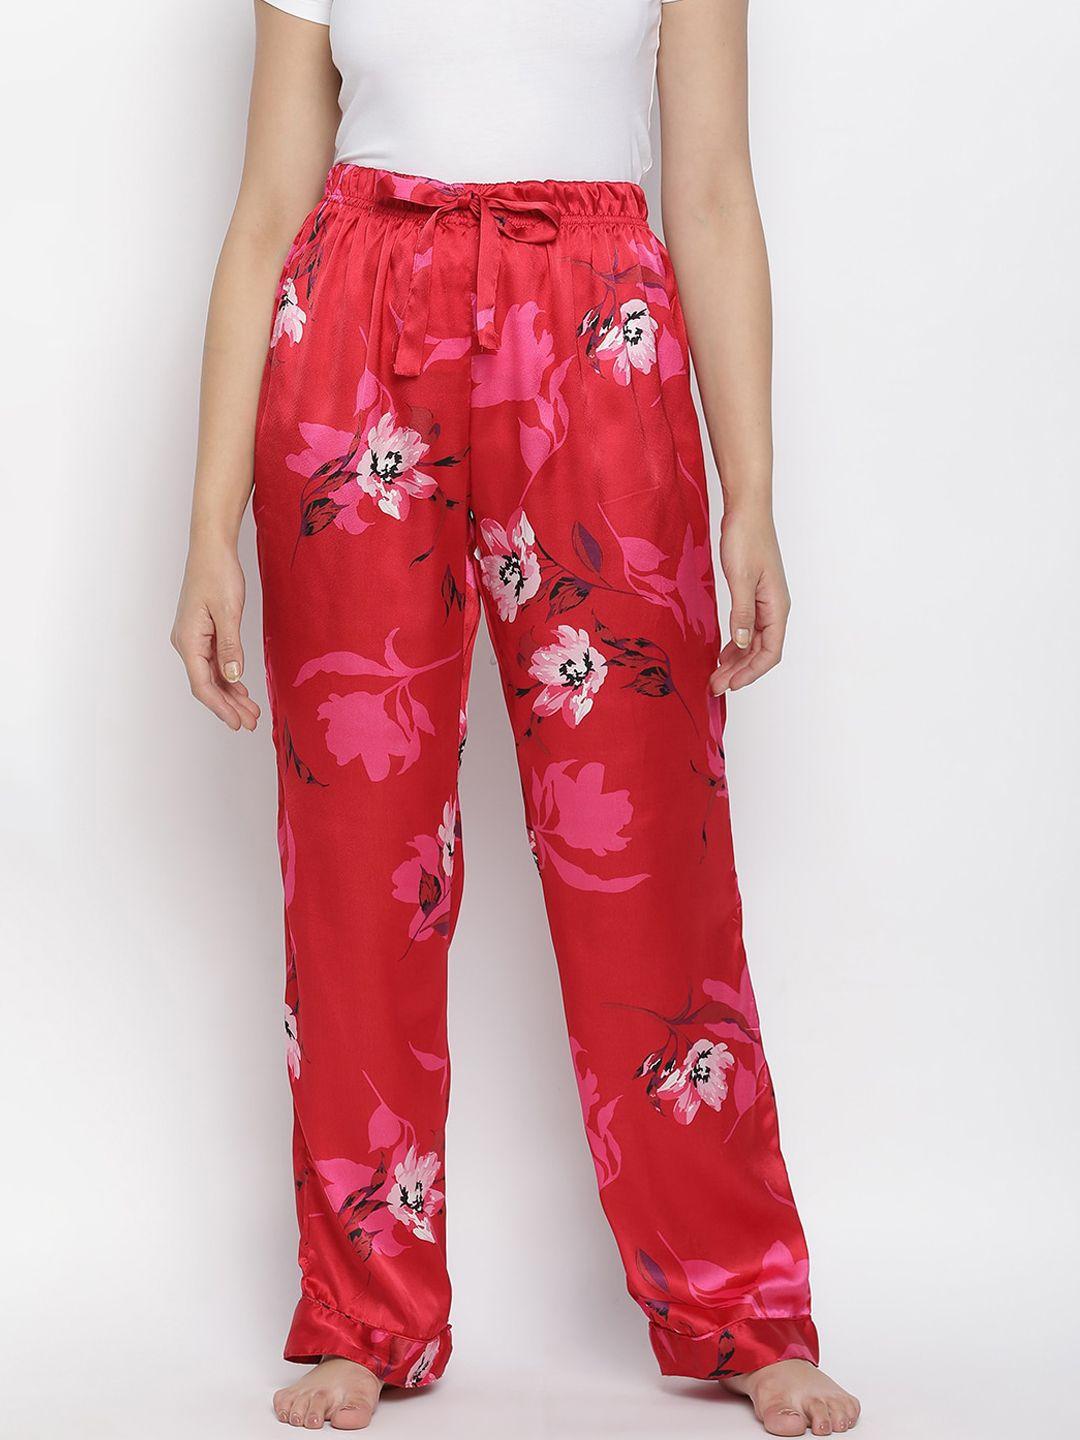 oxolloxo-women-red-printed-lounge-pant